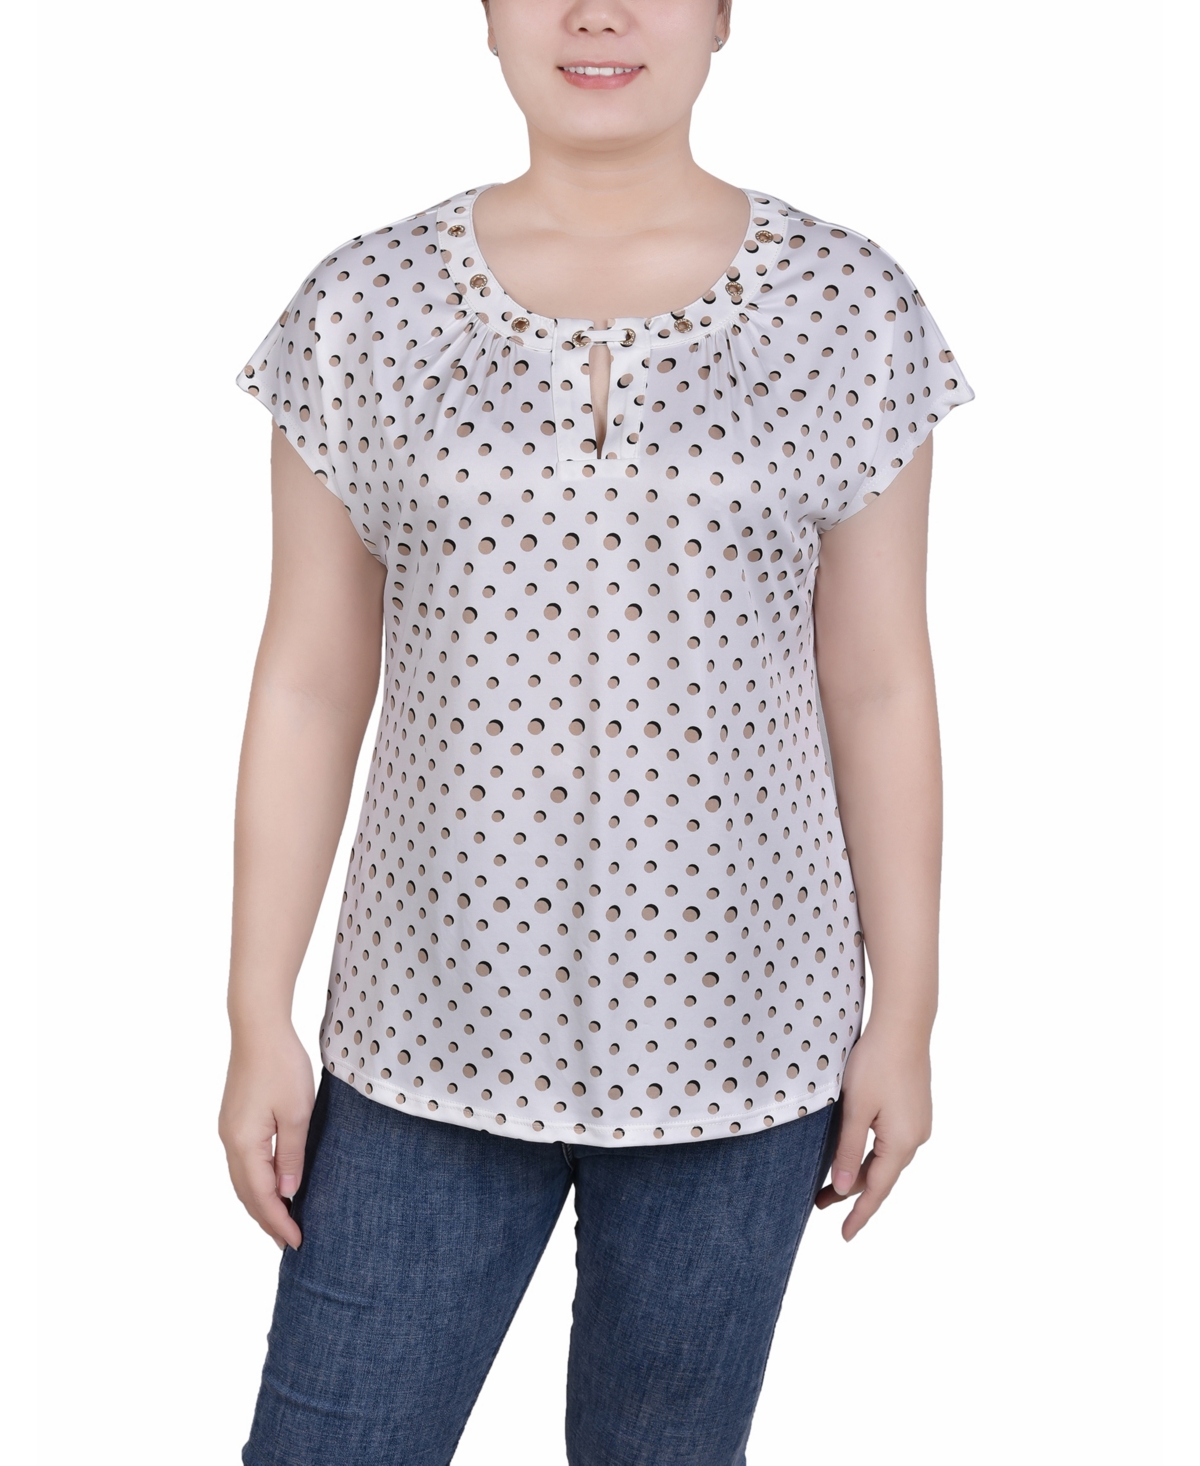 NY COLLECTION WOMEN'S EXTENDED SLEEVE TOP WITH GROMMETS